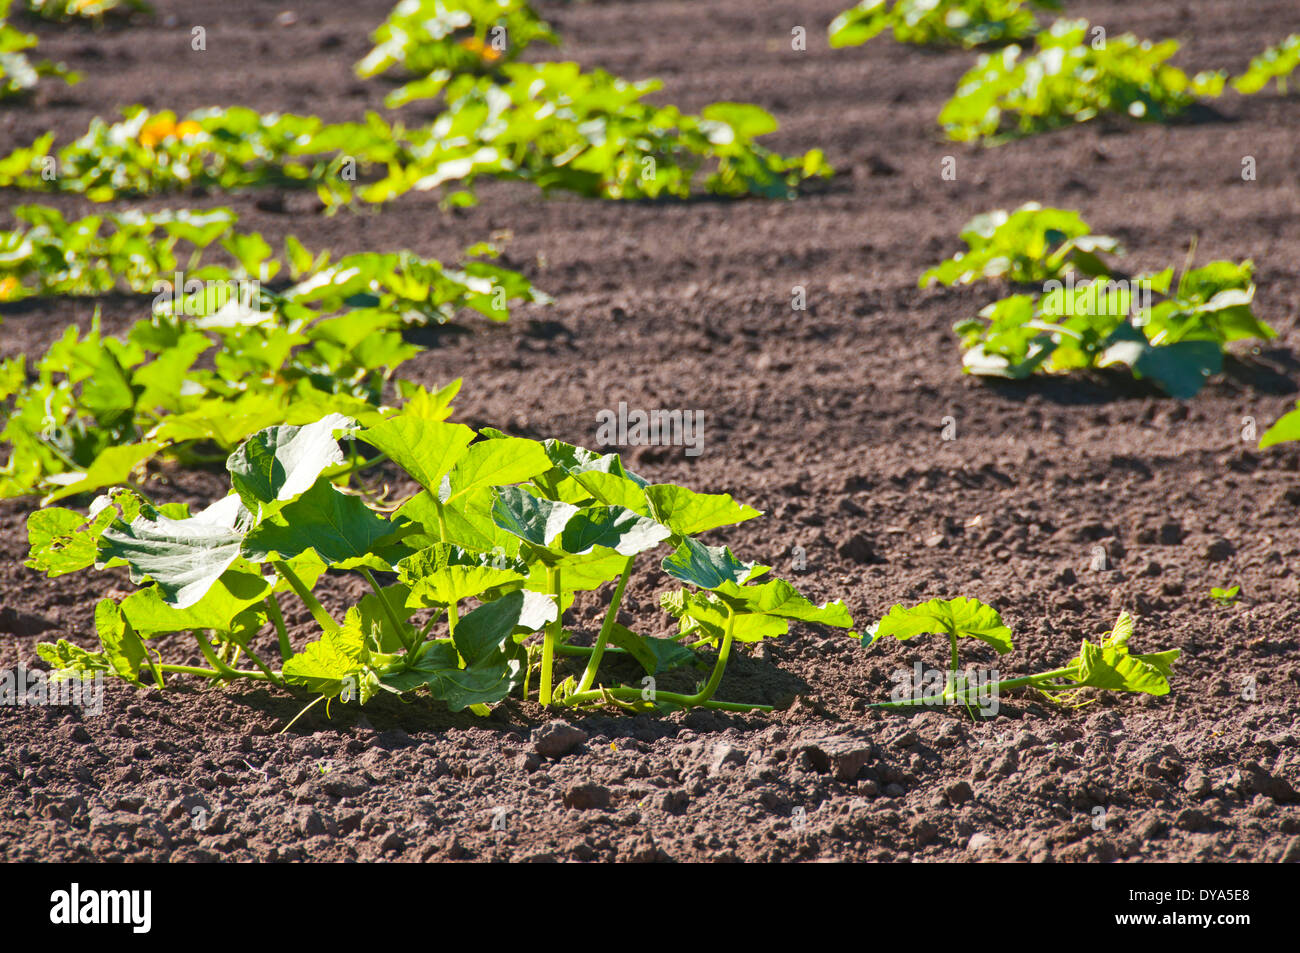 Germany, Europe, pumpkin cultivation, agriculture, vegetables Stock Photo